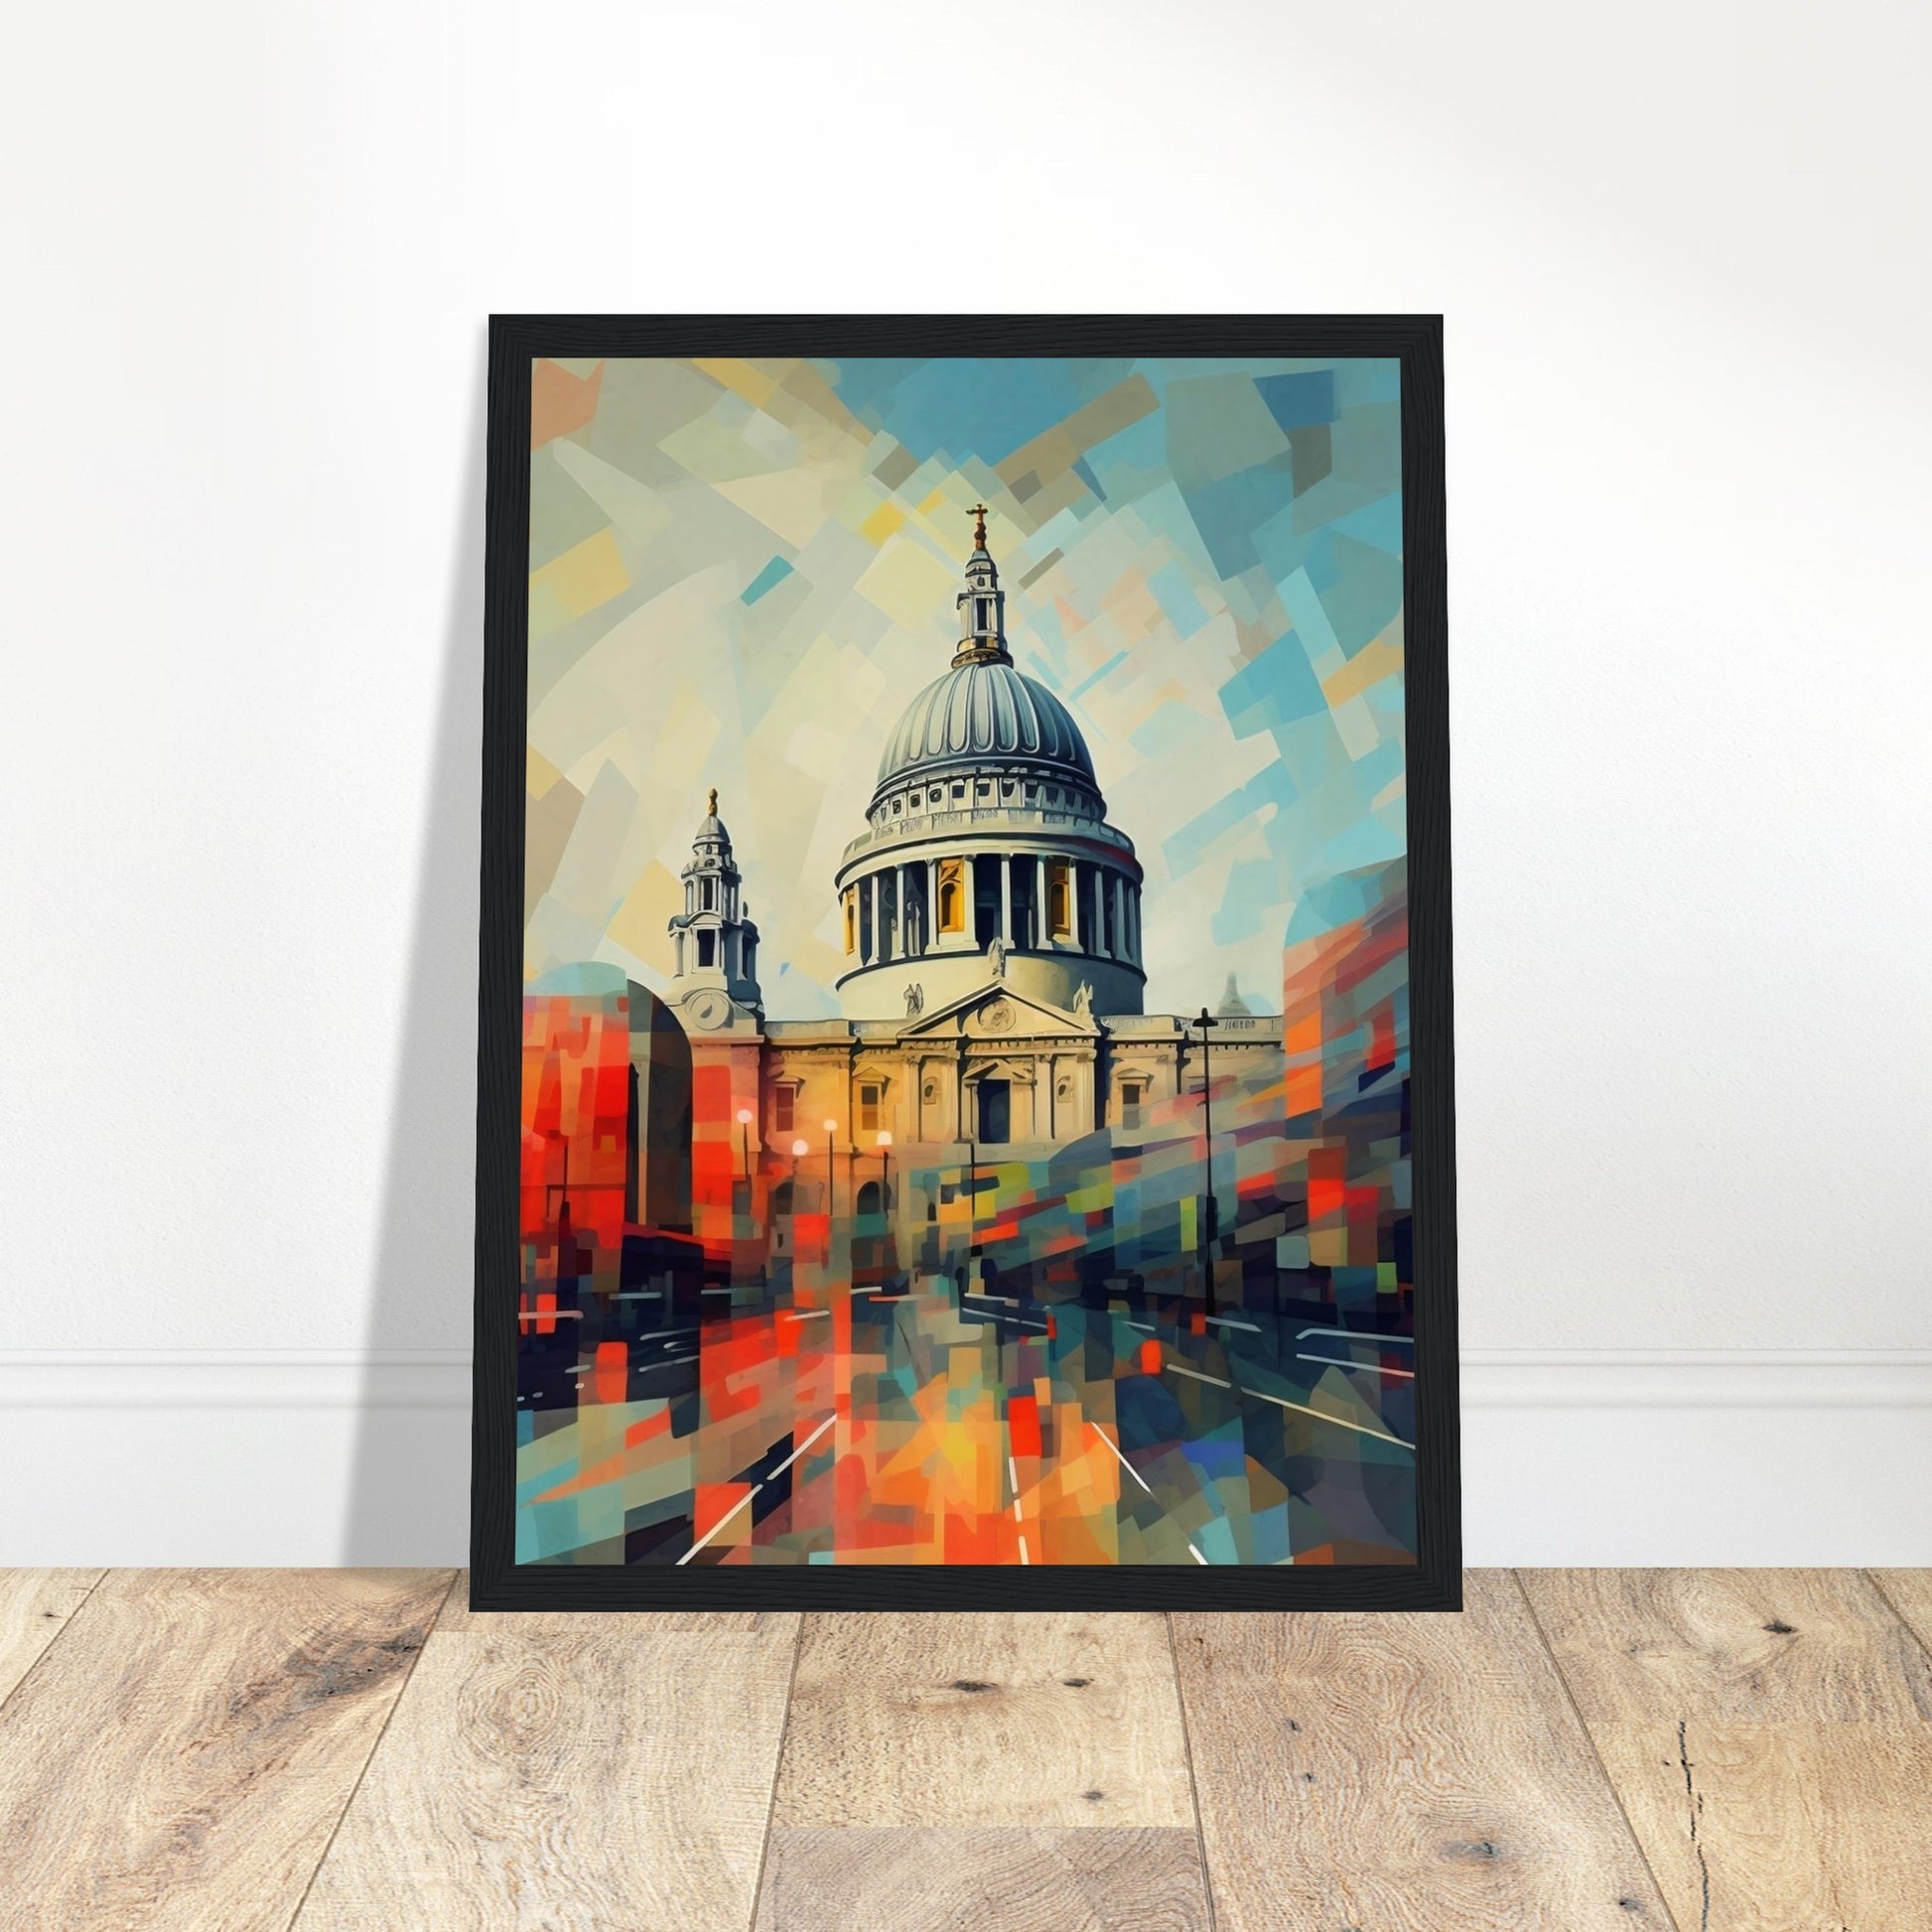 St Paul's CathedralAbstract Art - Print Room Ltd No Frame Selected 50x70 cm / 20x28"